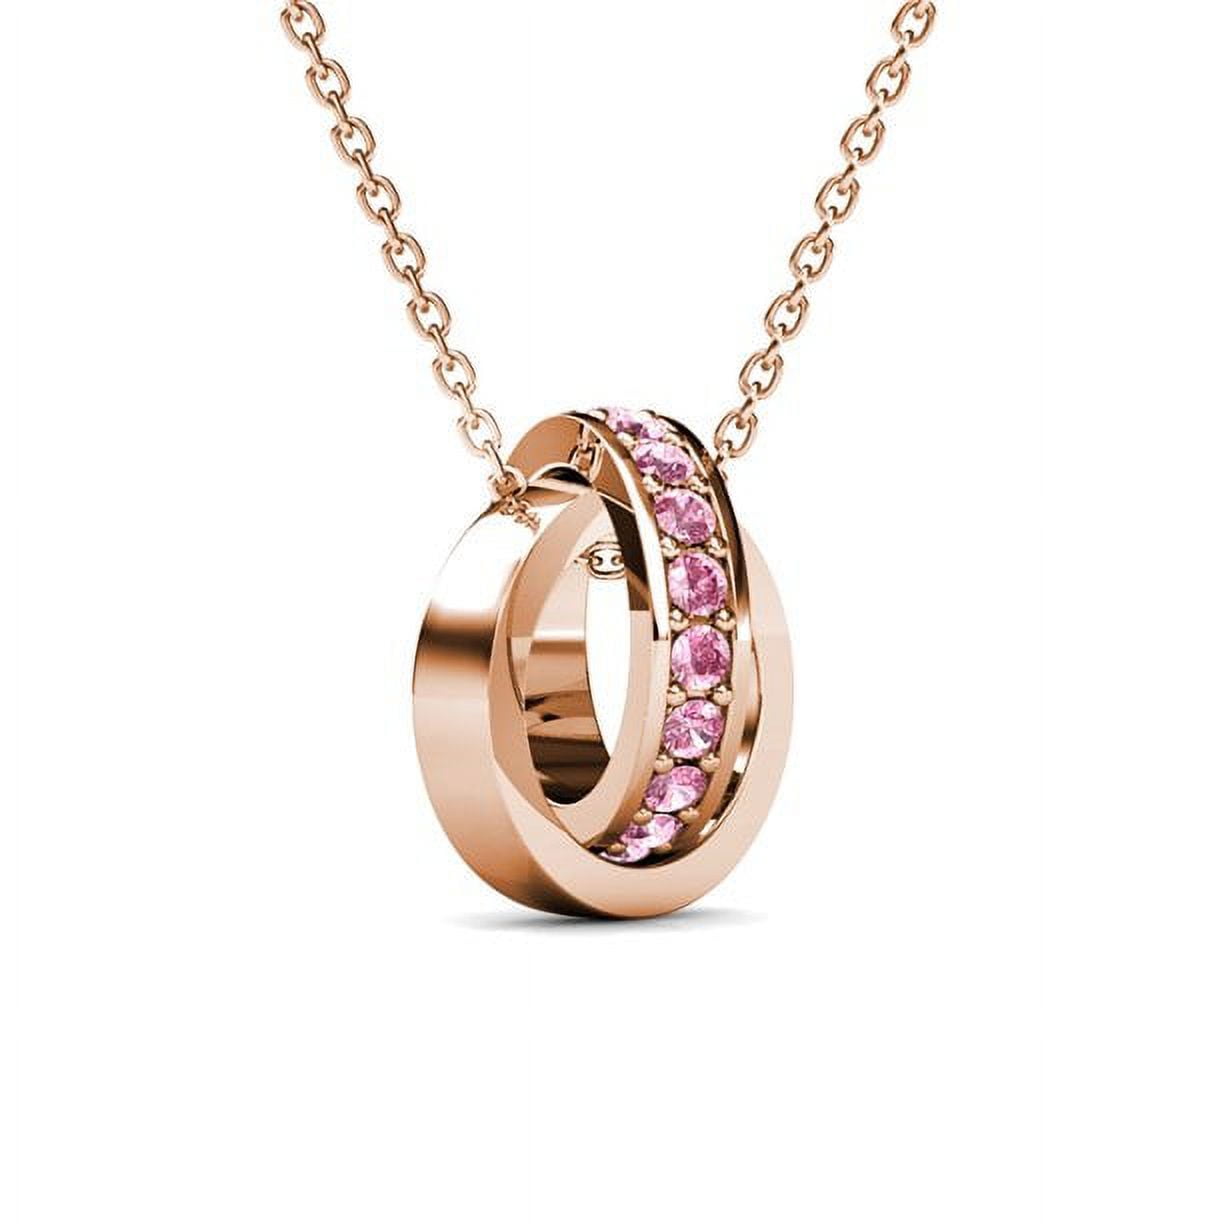 18K Gold Diamond Love Gold Circle Necklace Set For Teen Girls From  Premiumjewelrystore, $22.43